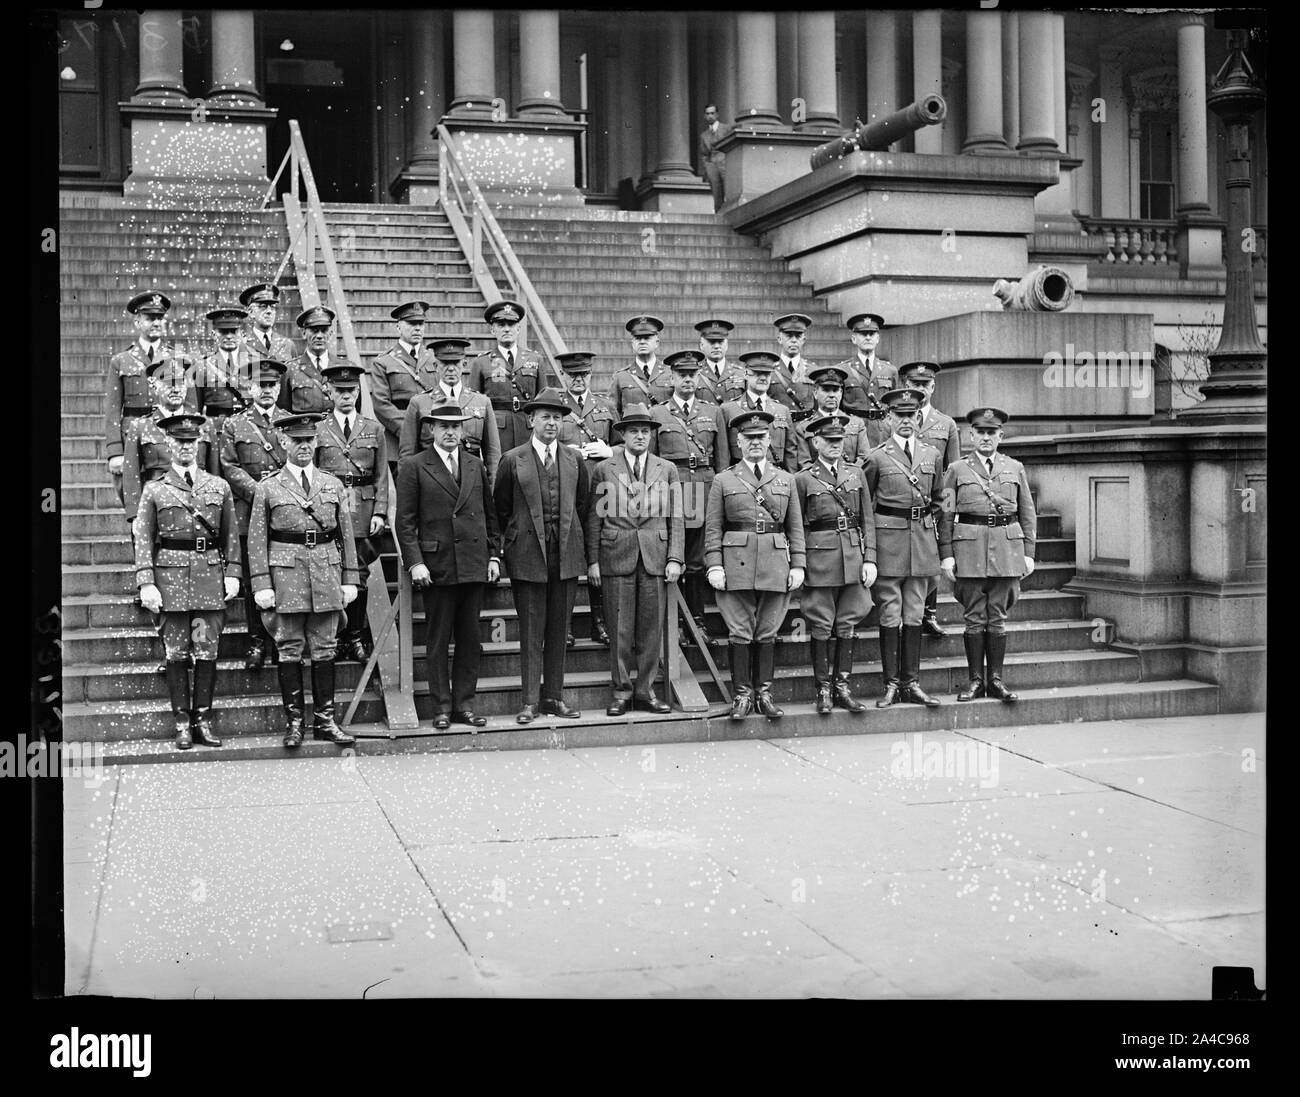 The Secretary of War, The Hon. Dwight Davis, and the Chief of Staff, the Deputy Chief of Staff, the assistants Chief of Staff, and the Chiefs of branches posed for a photograph on the steps of the war Dept. In the group left to right, front row, Major Gen. Frank Parker, Major Gen. Charles P. Summerall, Chief of Staff, Assistant Secretary of War, Col. C.B. Robbins, Secretary of War, Dwight F. Davis, Major Gen, B.H. Wells, Deputy Chief of Staff, Brig. Gen. E.E. Booth, Ass't Chief of Staff, Major Gen. Fred T. Austin, Chief of Field Artillery, Major Gen. A.L. Carmichael, Chief of Finance Stock Photo